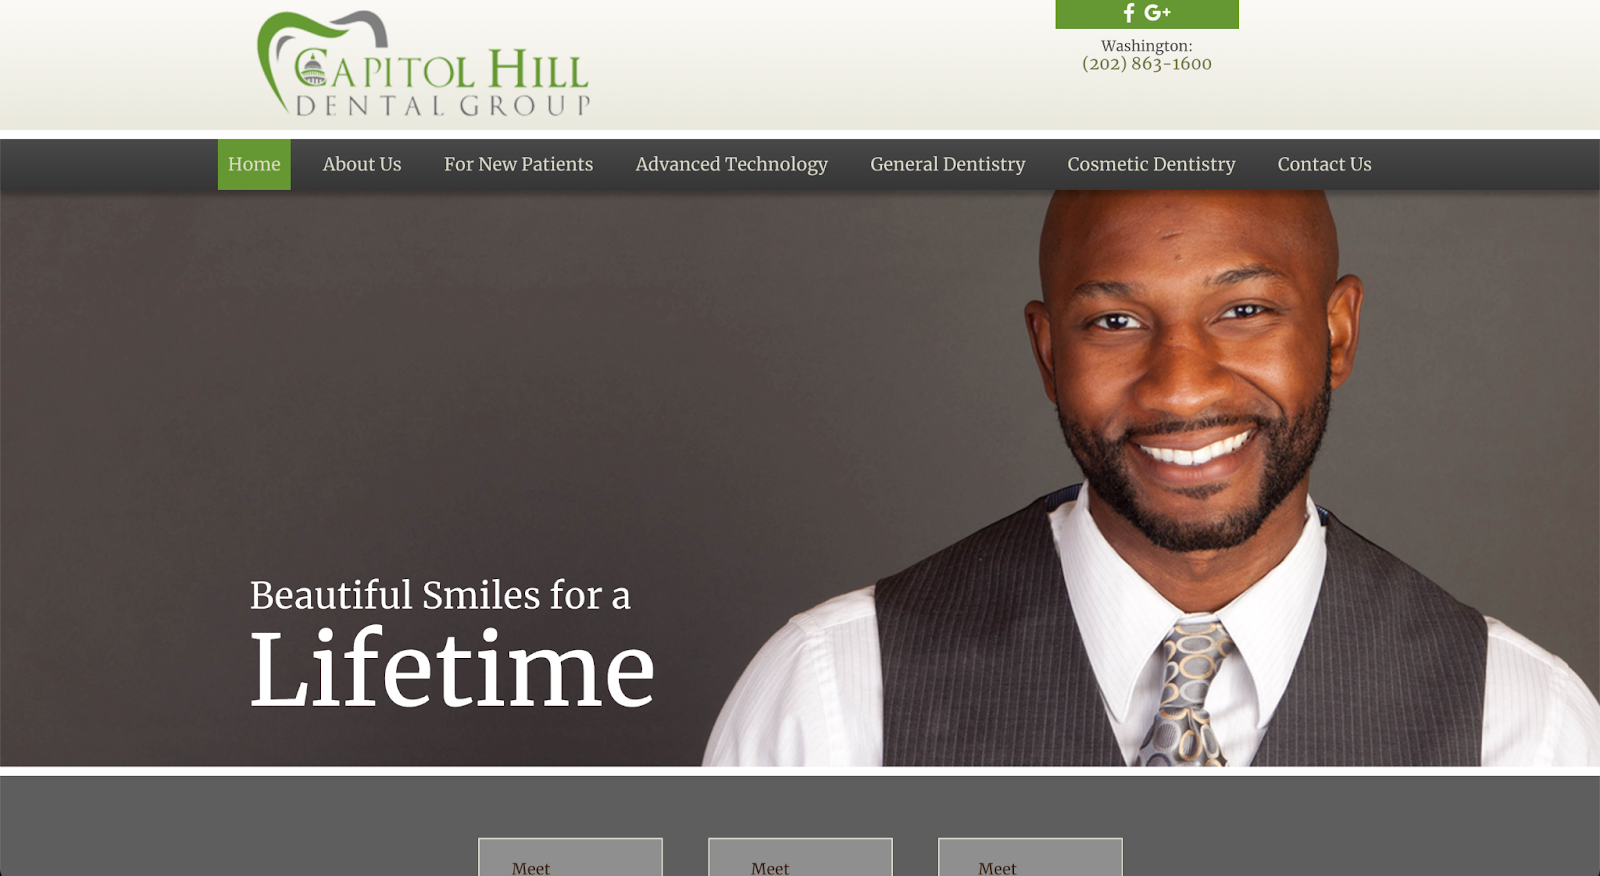 Conservative graphics help communicate the service lines and message of this DC based dental website for Capitol Hill Dental Group